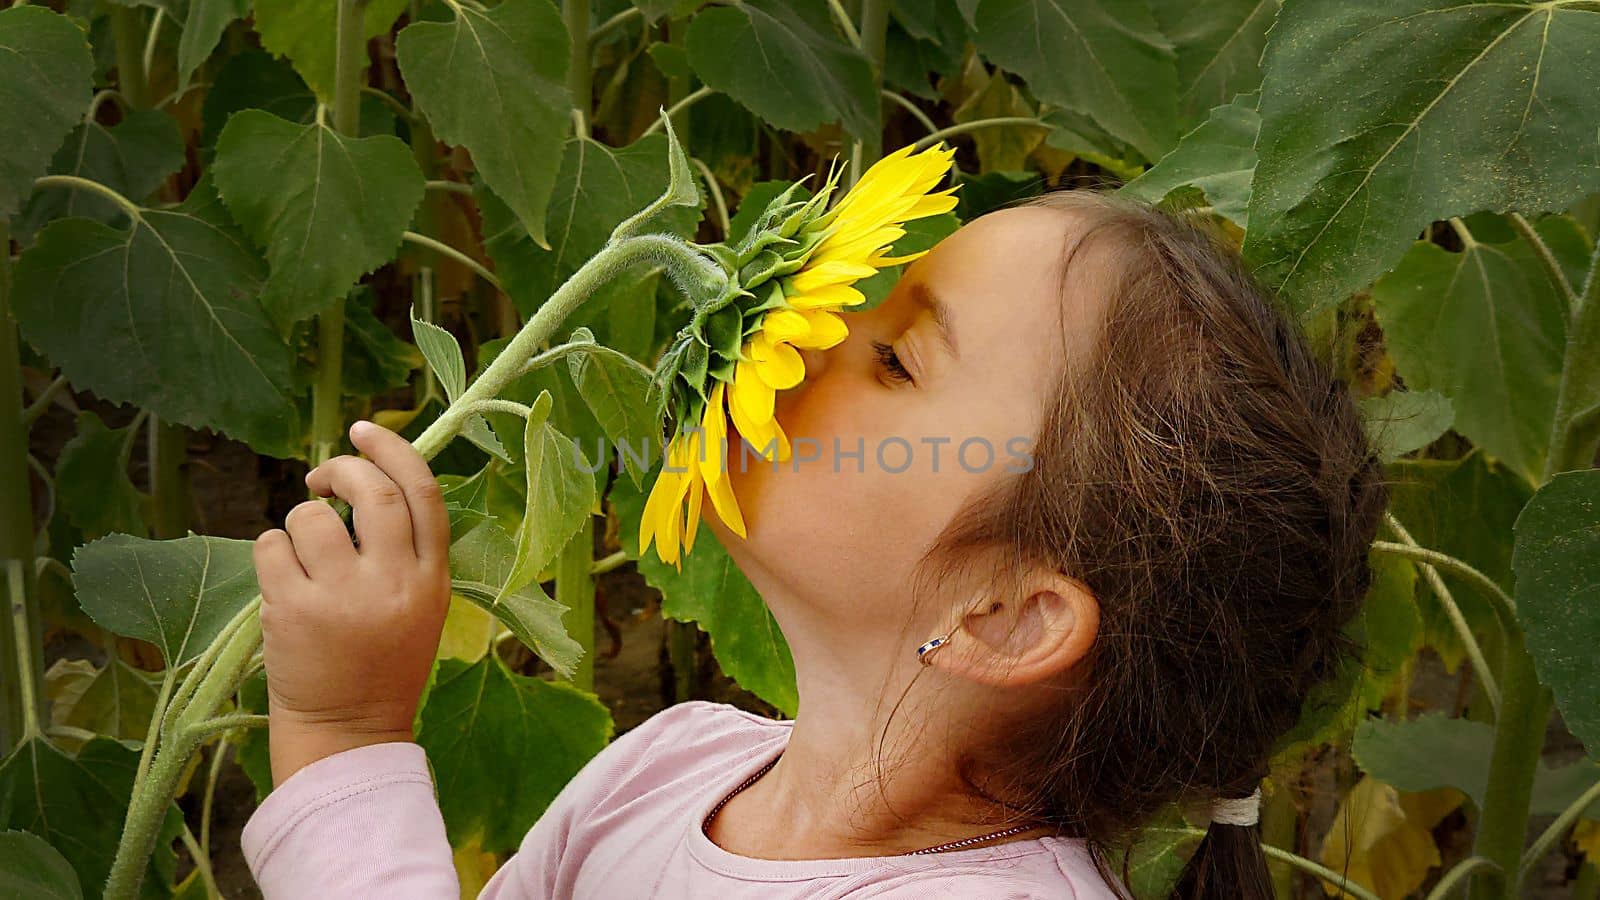 A little girl on a cloudy day sniffs a yellow sunflower close-up